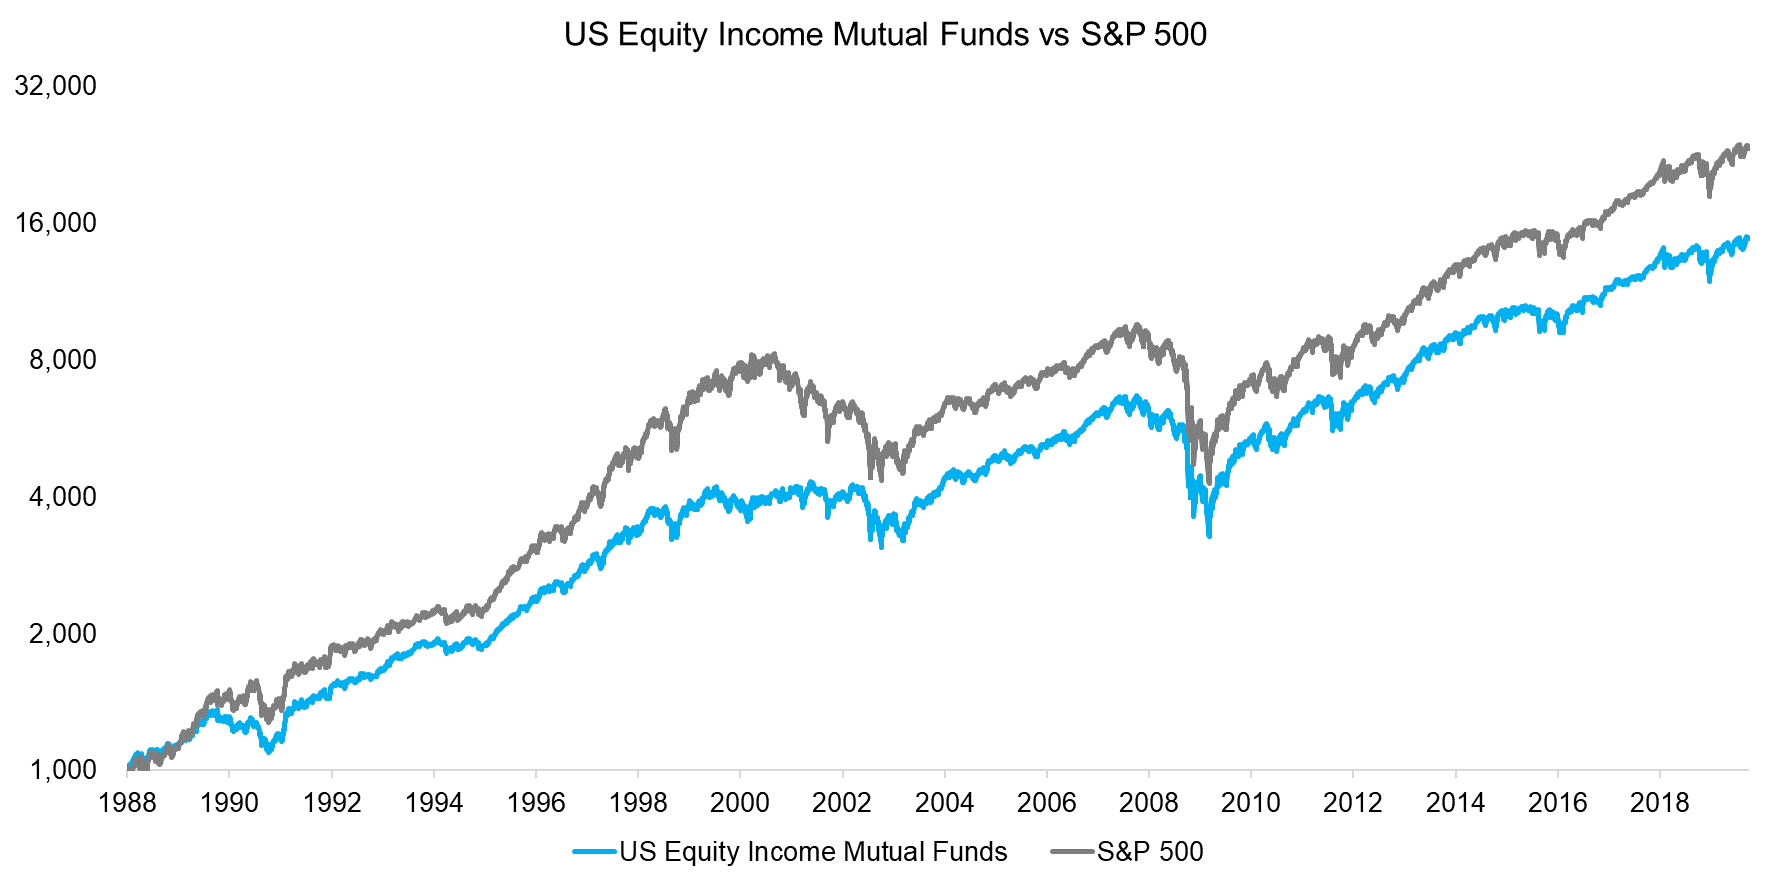 US Equity Income Mutual Funds vs S&P 500